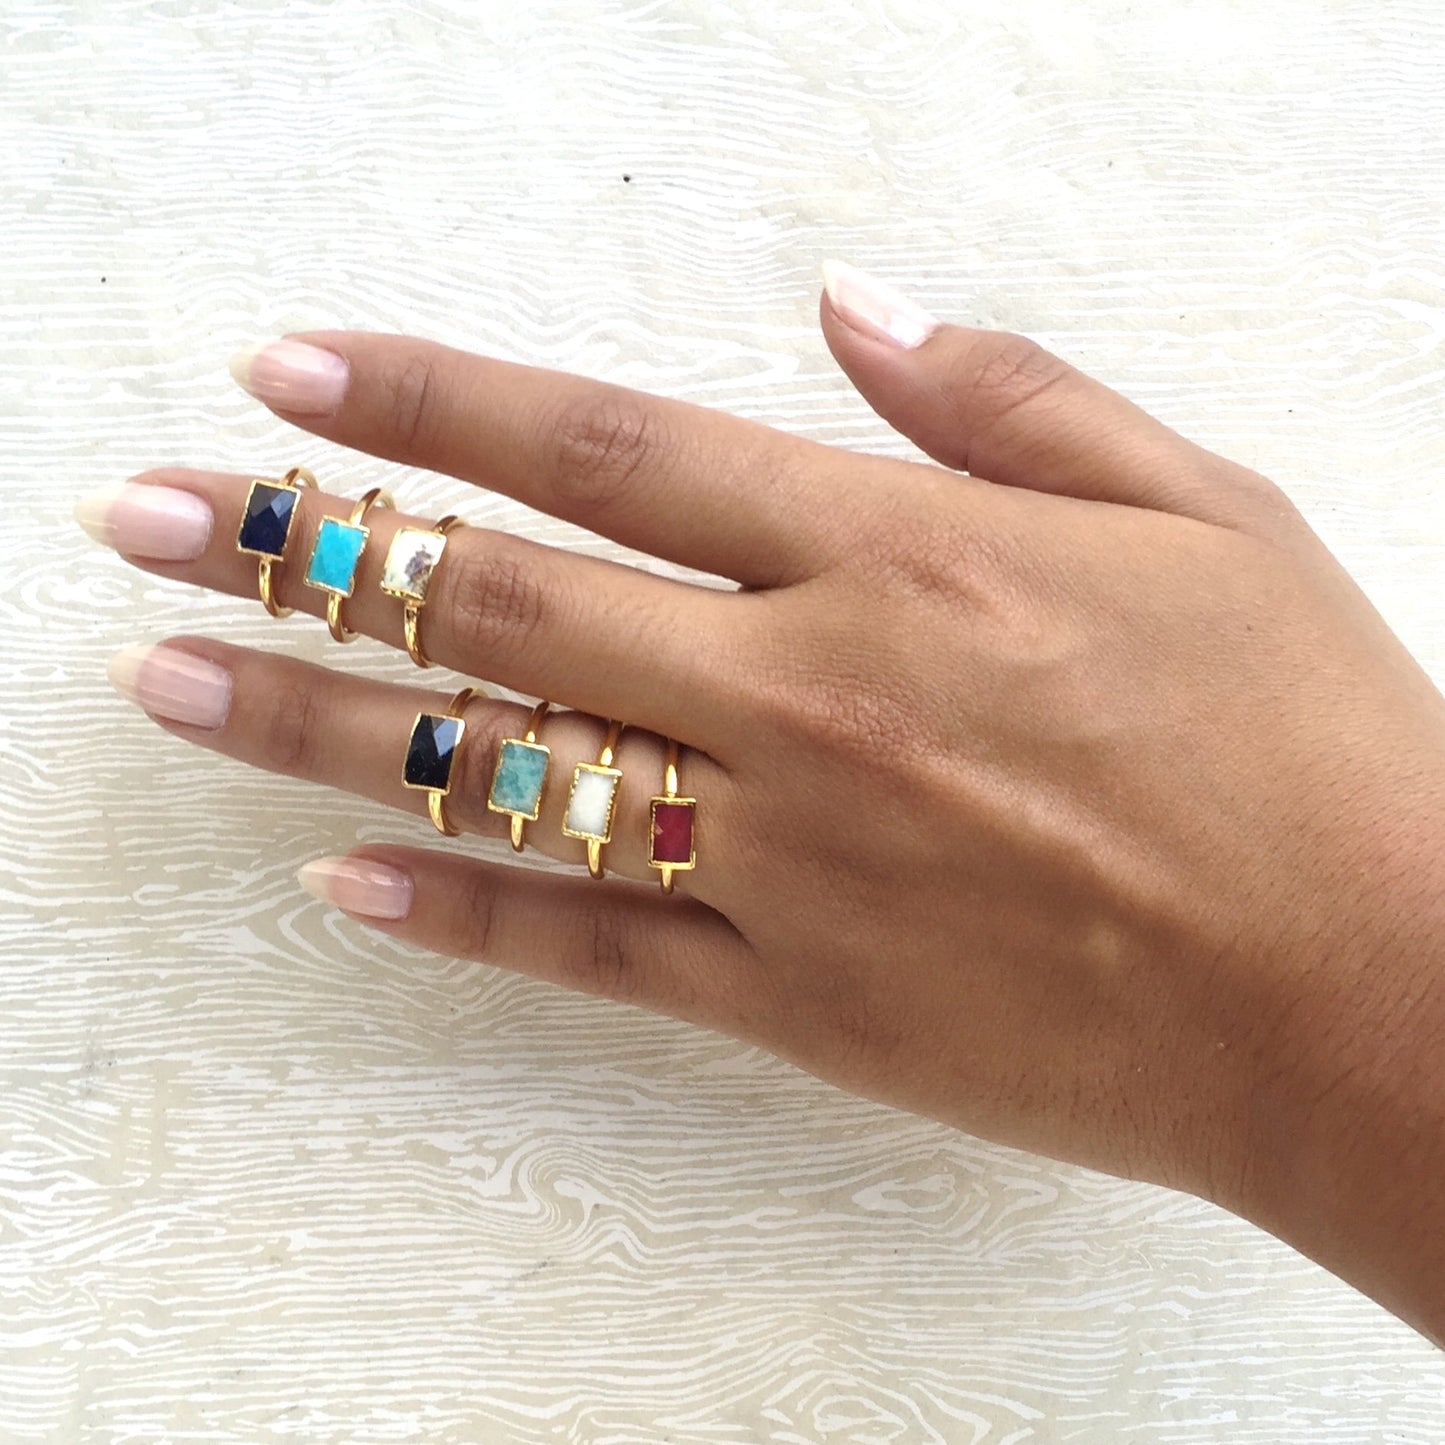 semi-precious stone stacking rings on hand